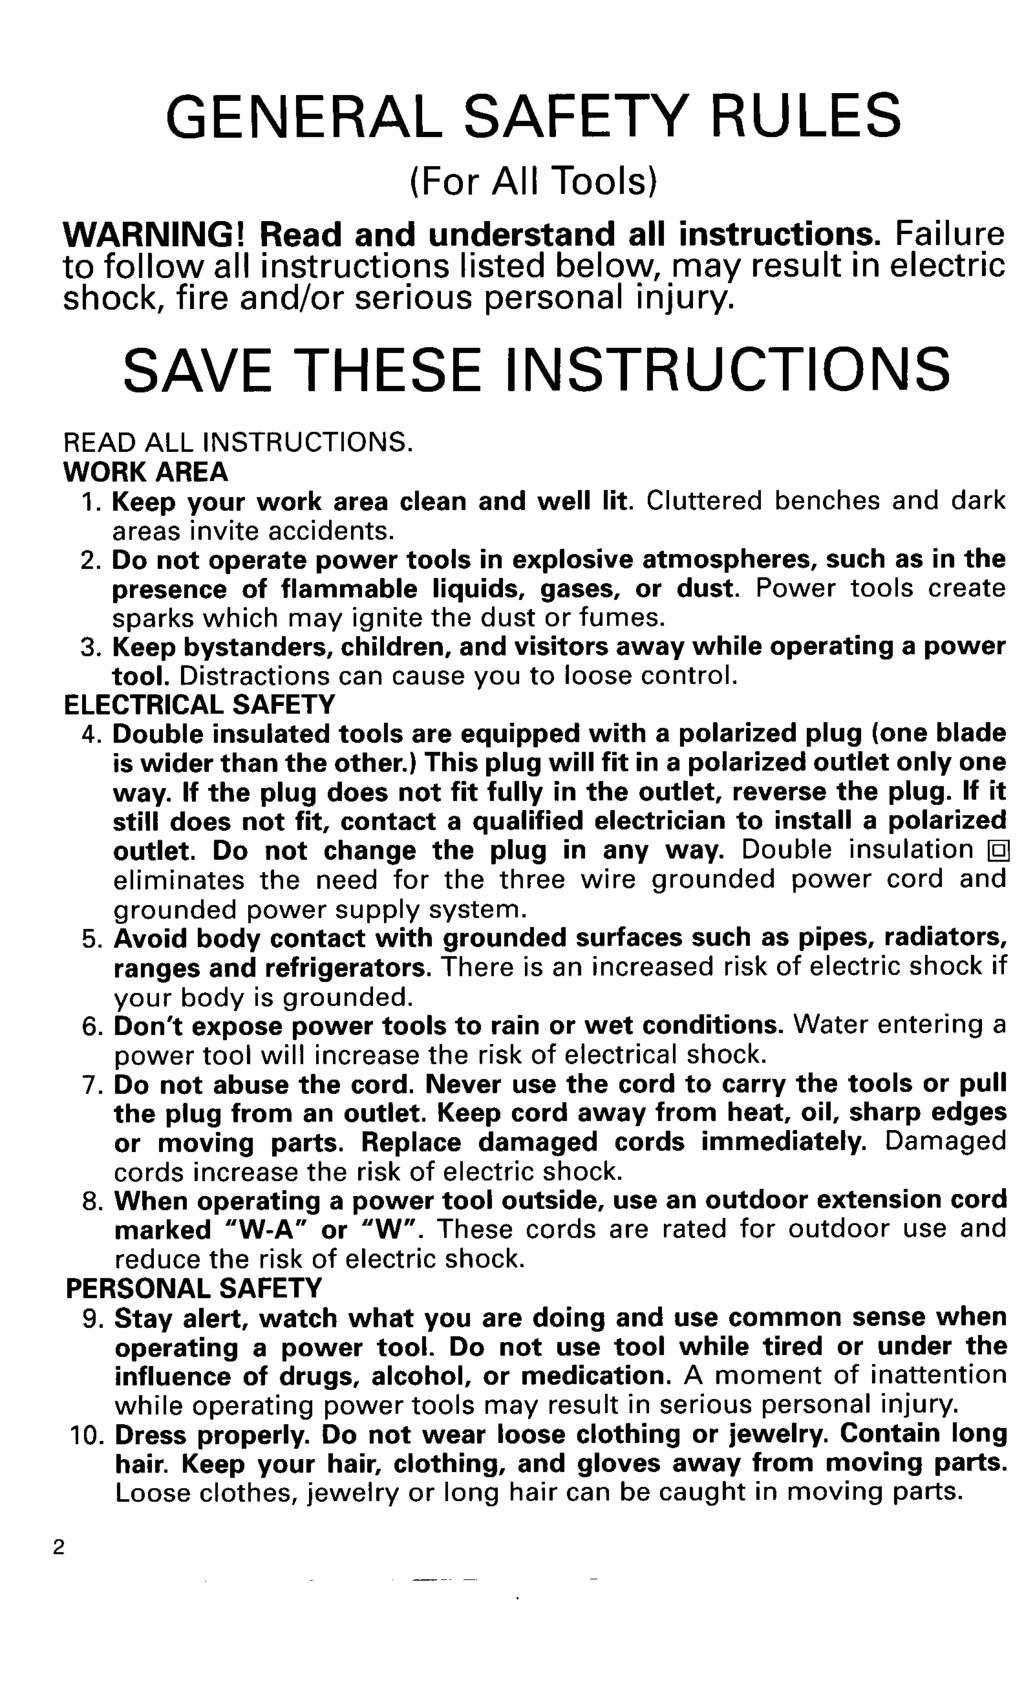 GENERAL SAFETY RULES (For All Tools) WARNING! Read and understand all instructions. Failure to follow all instructions listed below, may result in electric shock, fire and/or serious personal injury.